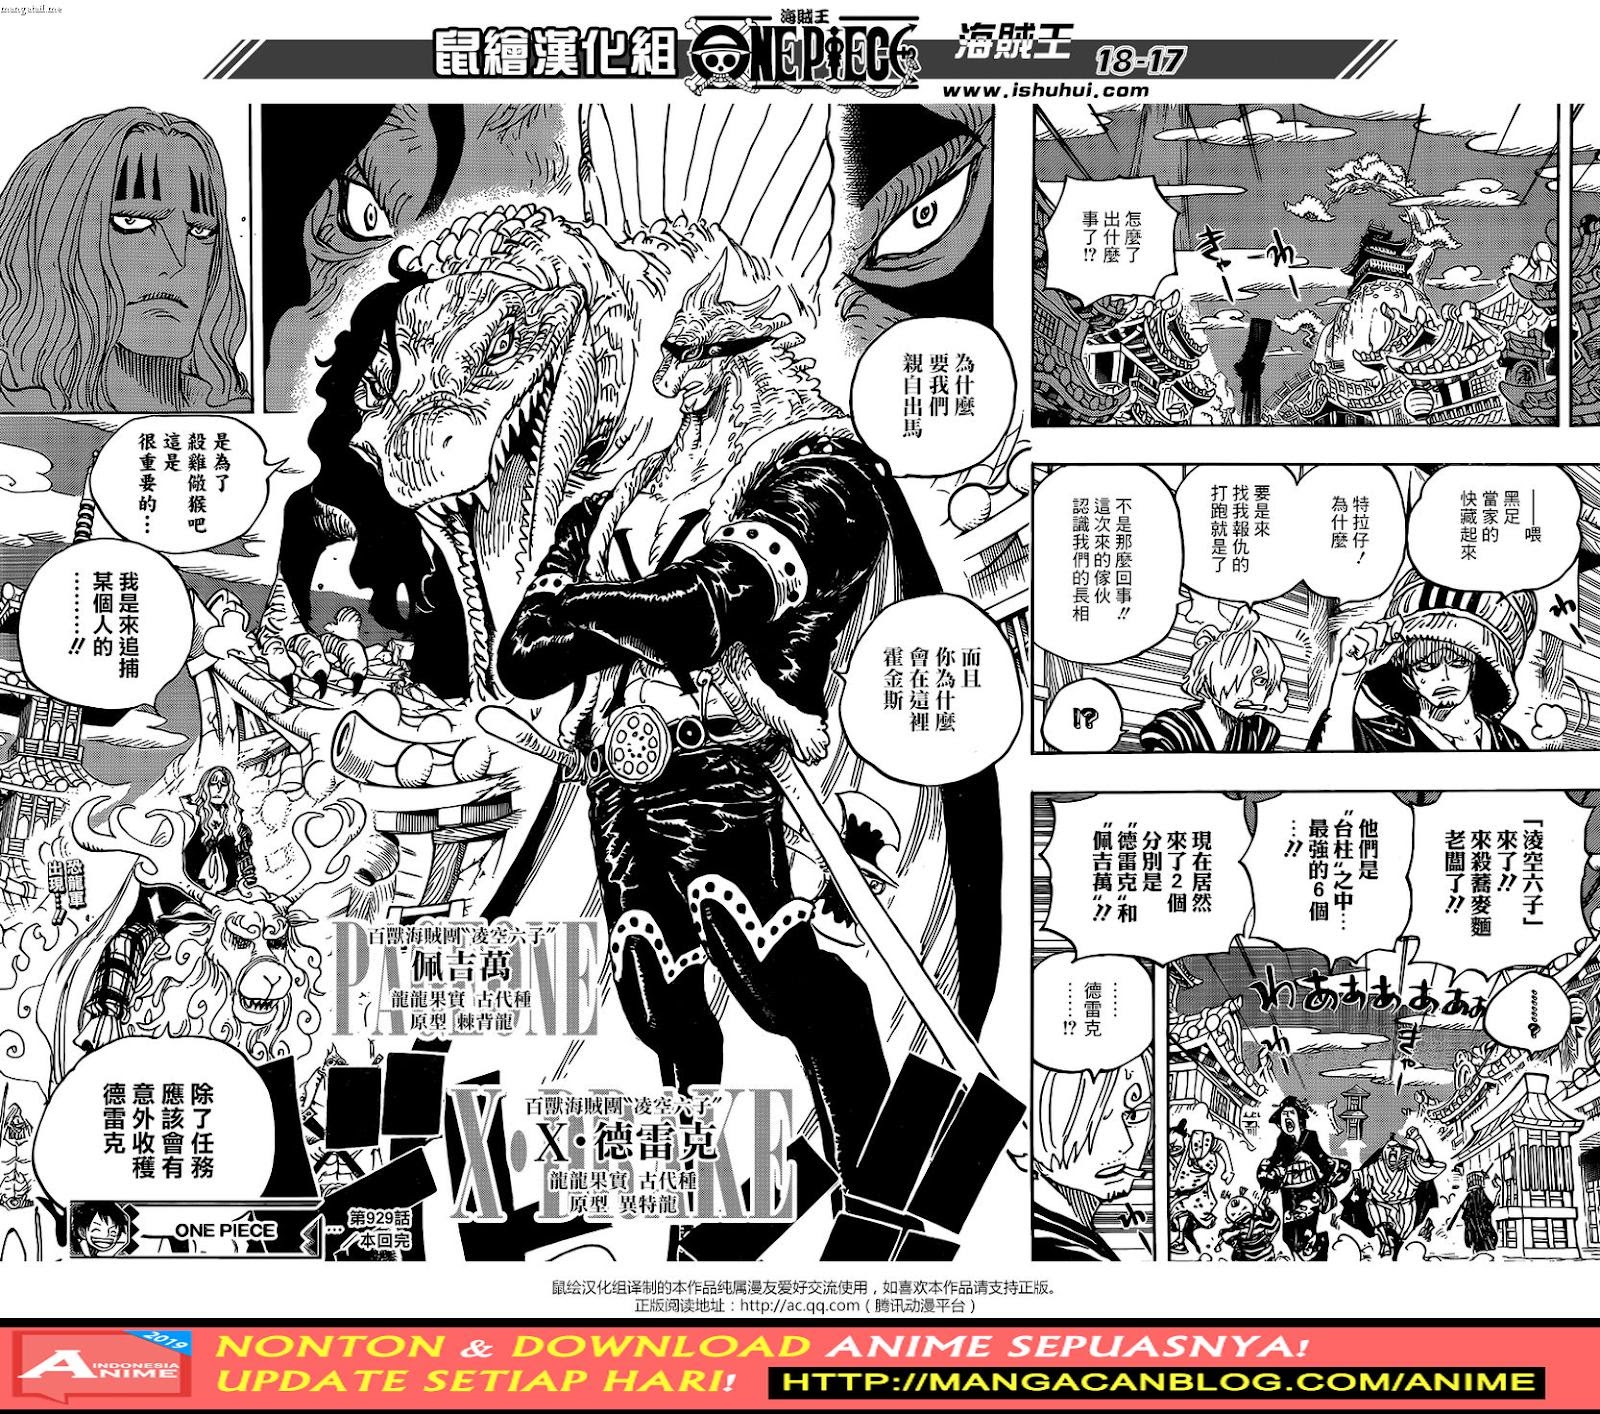 One Piece Chapter 928 – Raw - 119